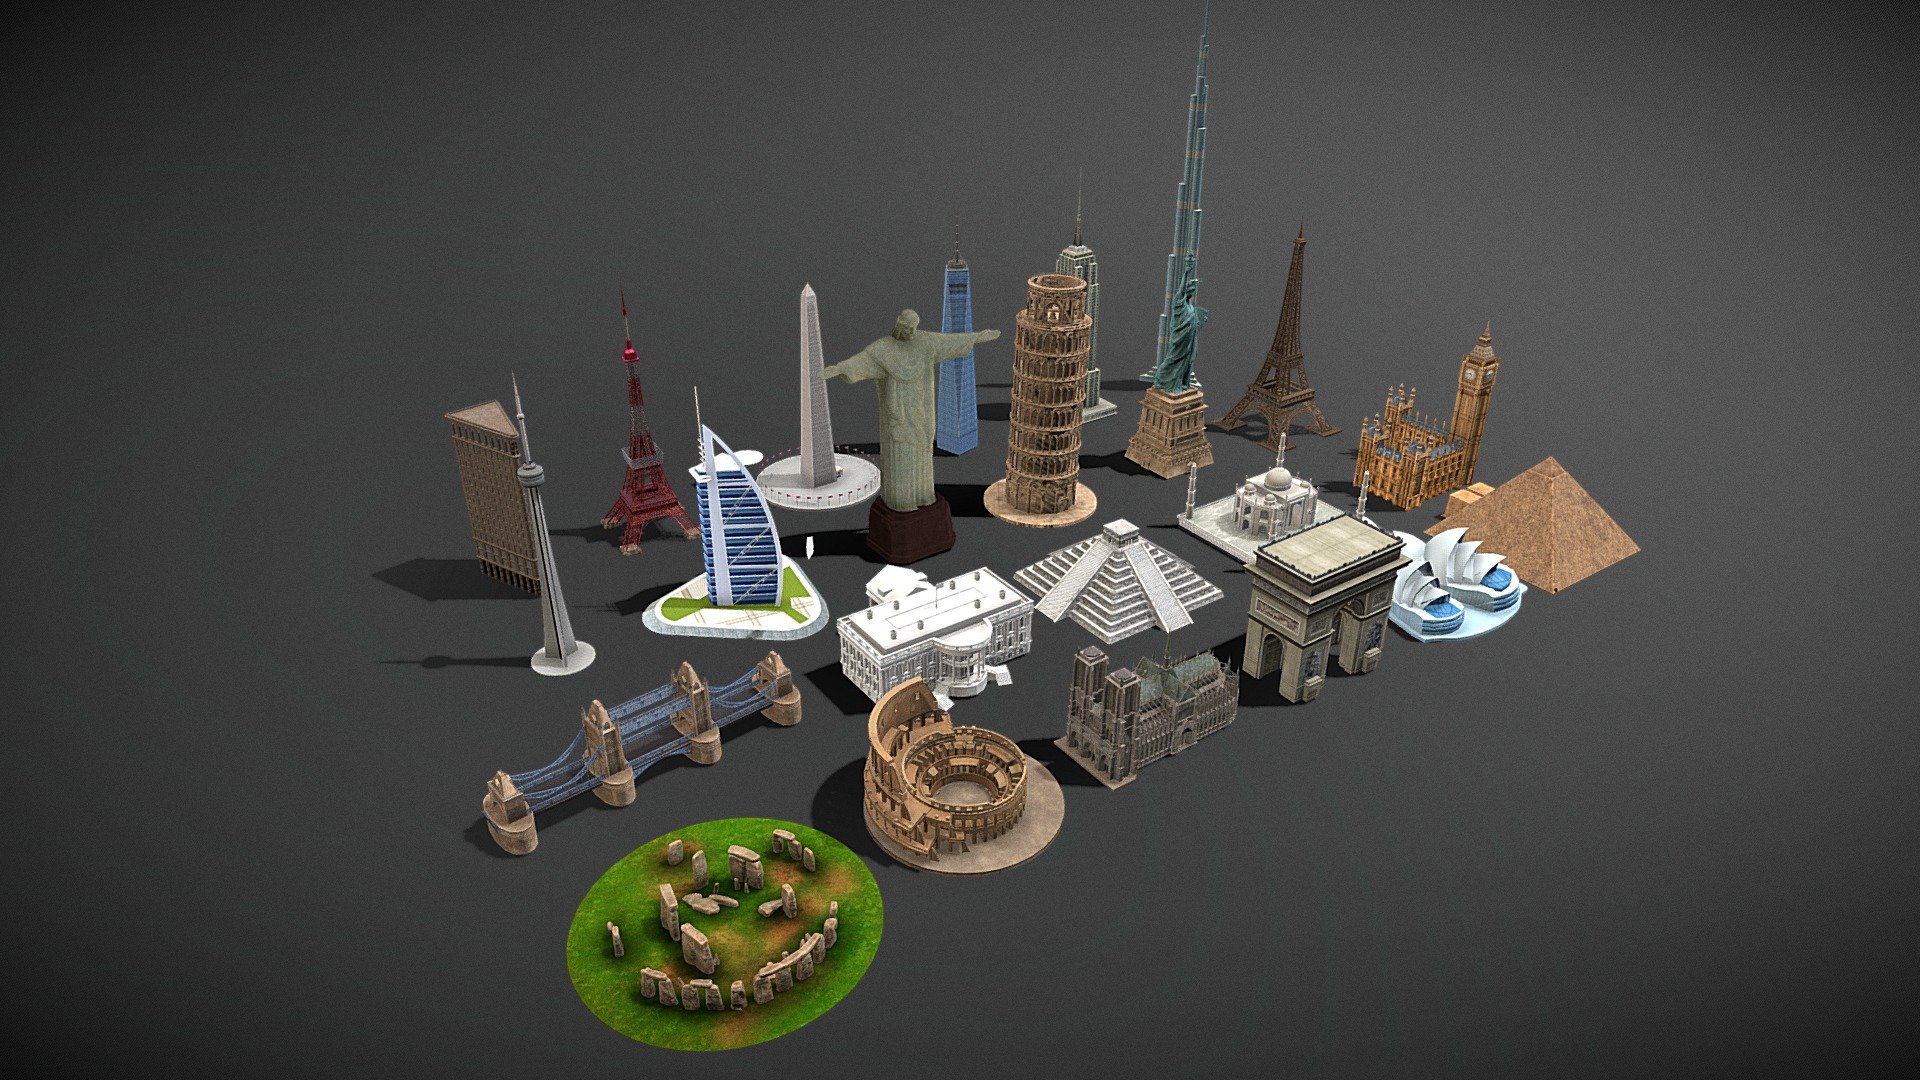 Here are 26 beautiful world famous building models. They are Stonehenge, Eiffel Tower, Colosseum, Big Ben, Arc de Triomphe, Tokyo Tower, Notre-Dame de Paris, CN Tower, One World Trade Center, Flatiron Building, Empire State Building, Taj Mahal, Washington Monument, White House, Cristo Redentor, Burj Khalifa Bubai Tower, The Statue of Liberty, Bisa, Burj Al Arab Hotel, Sydney Opera House, Mesoamerican pyramid, Egyptian Pyramids, London Tower Bridge, Golden Gate Bridge, The Great Wall, Nest.

If you want more beautiful models, please feel free to contact me. 

E-mail: zhangshangbin1314159@gmail.com - World Famous Landmarks - Buy Royalty Free 3D model by Zhang Shangbin (@zhangshangbin1314159) 3d model